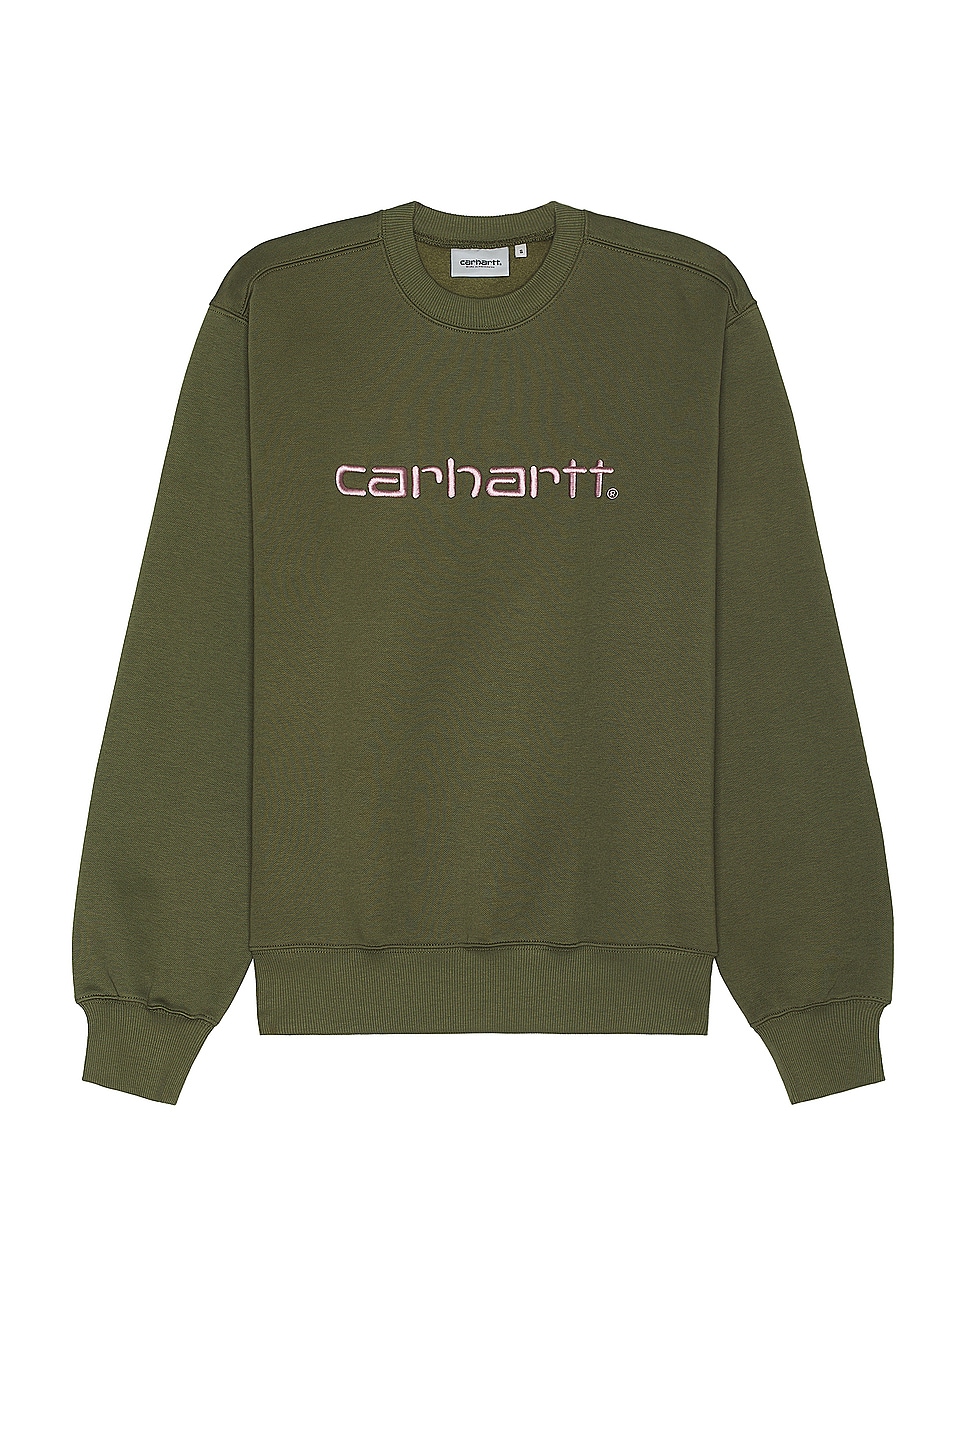 Image 1 of Carhartt WIP Carhartt Sweater in Dundee & Glassy Pink